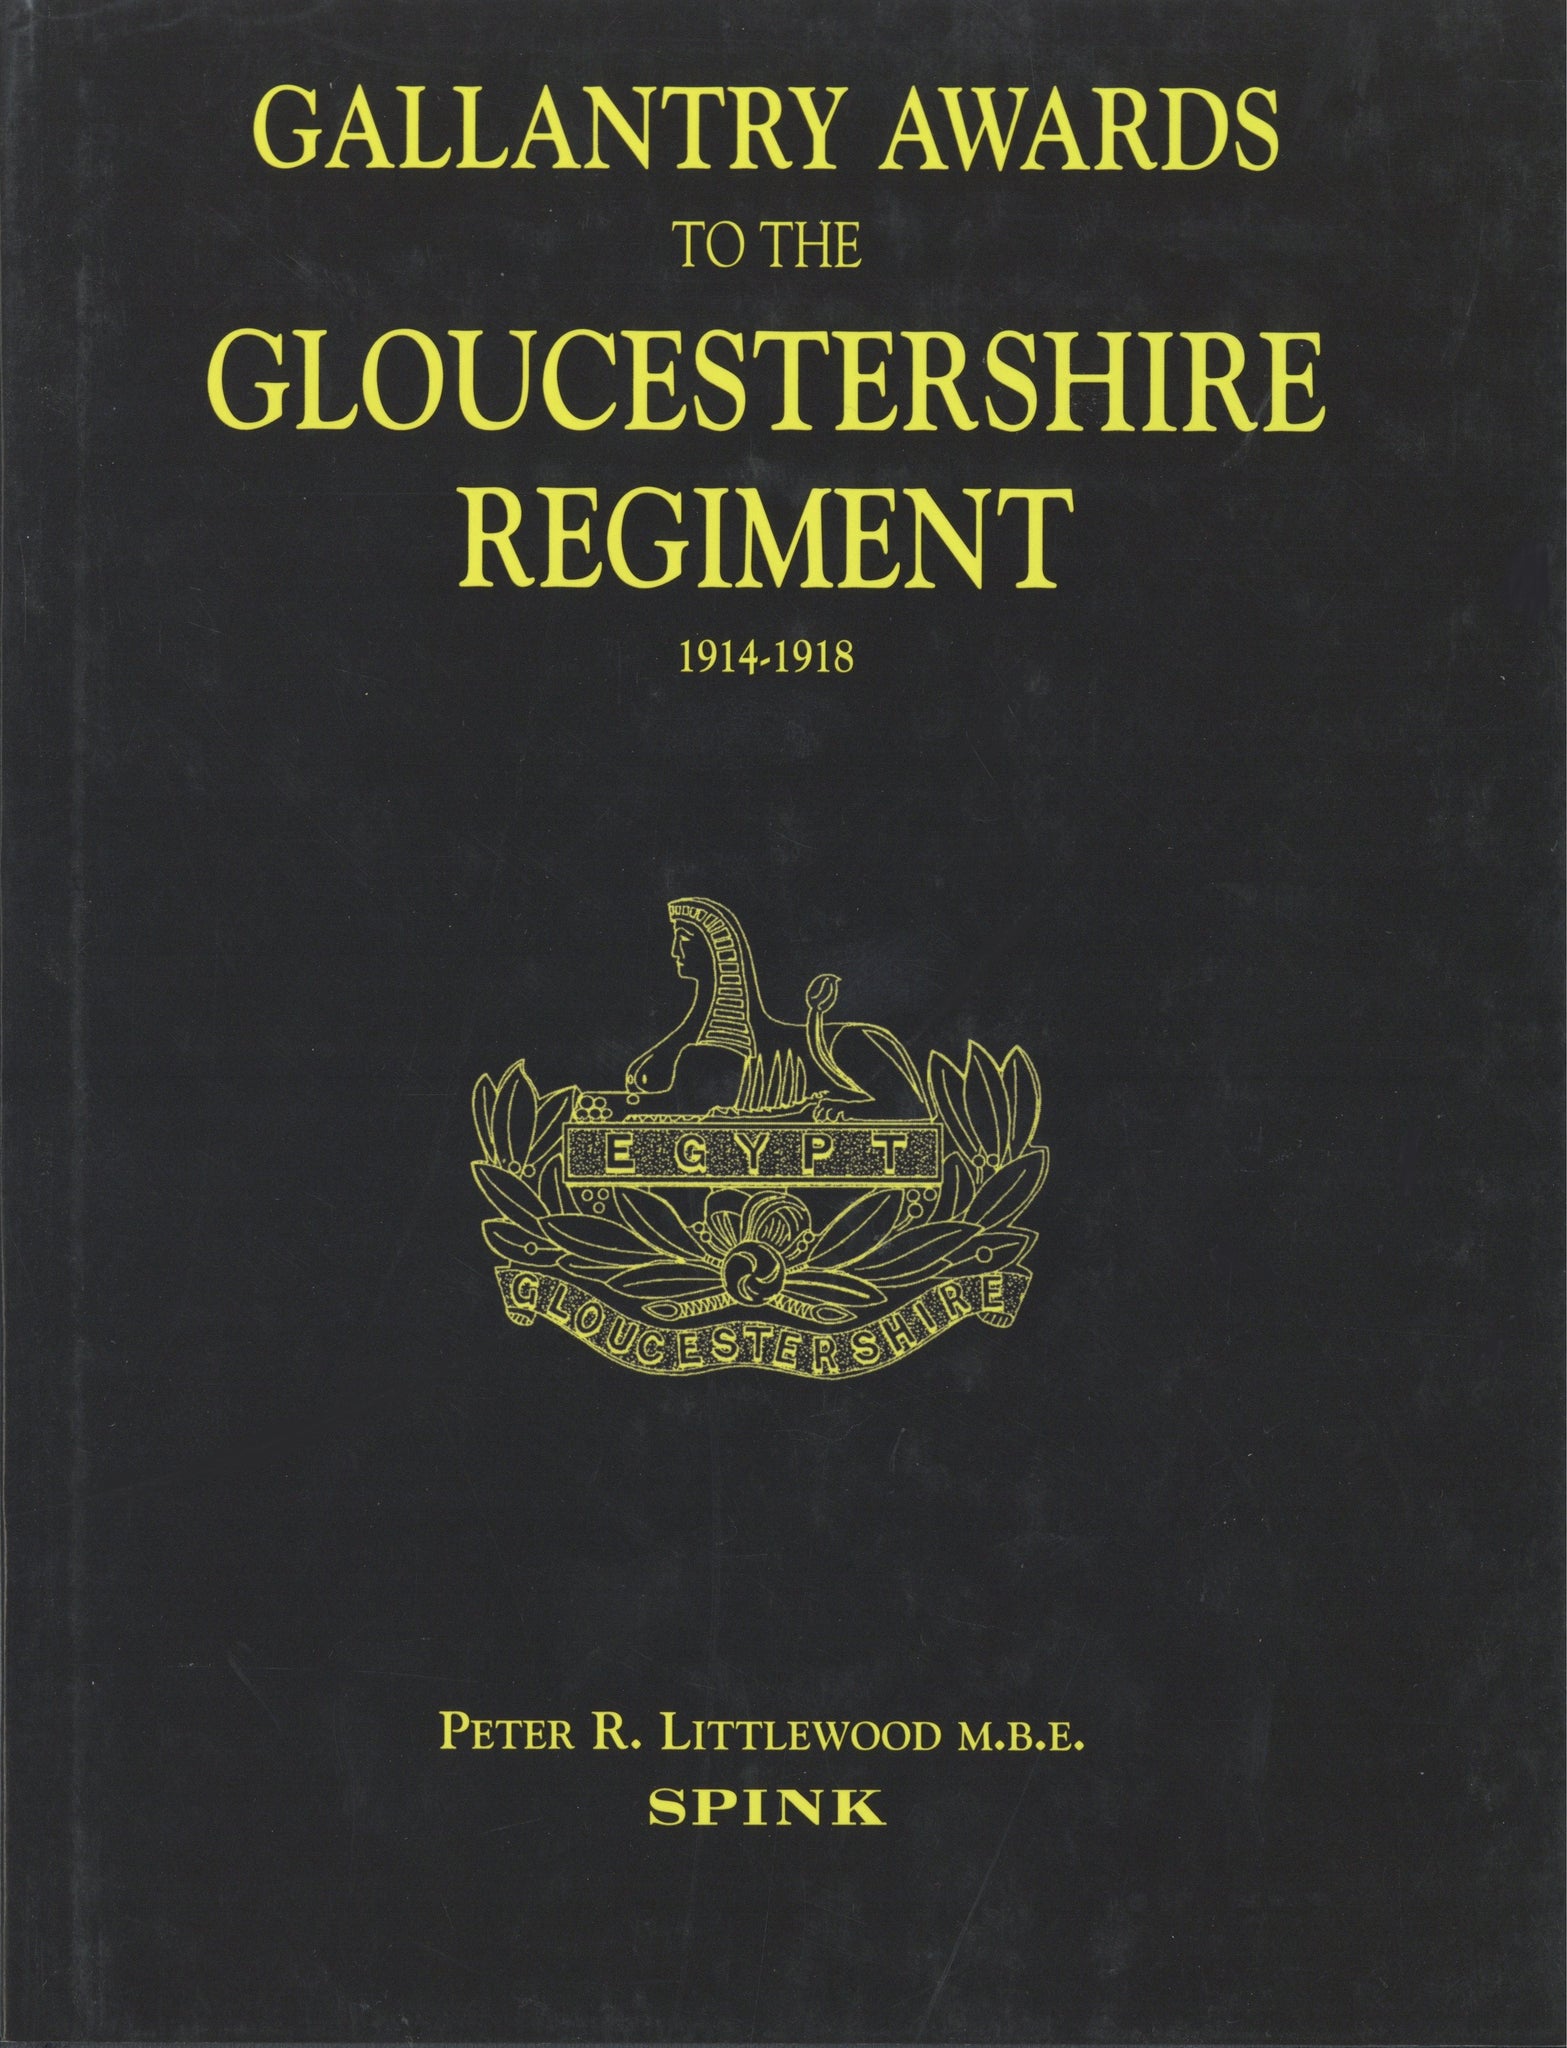 Gallantry Awards to the Gloucestershire Regiment 1914 - 1918 by Peter R. Littlewood M.B.E.